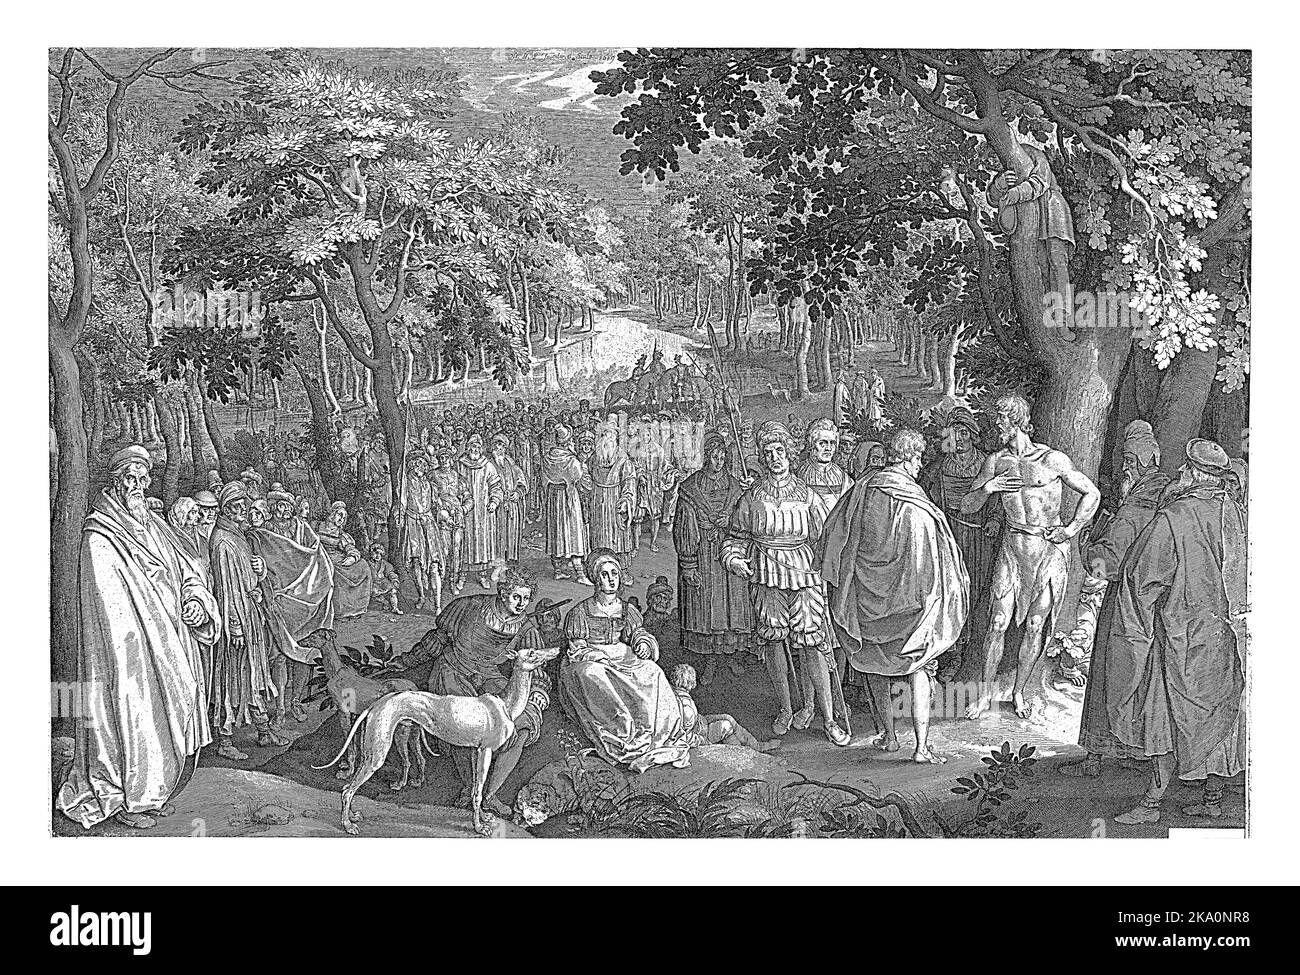 A forest landscape. In the right foreground is John the Baptist under a tree. He preaches to a large crowd. Stock Photo